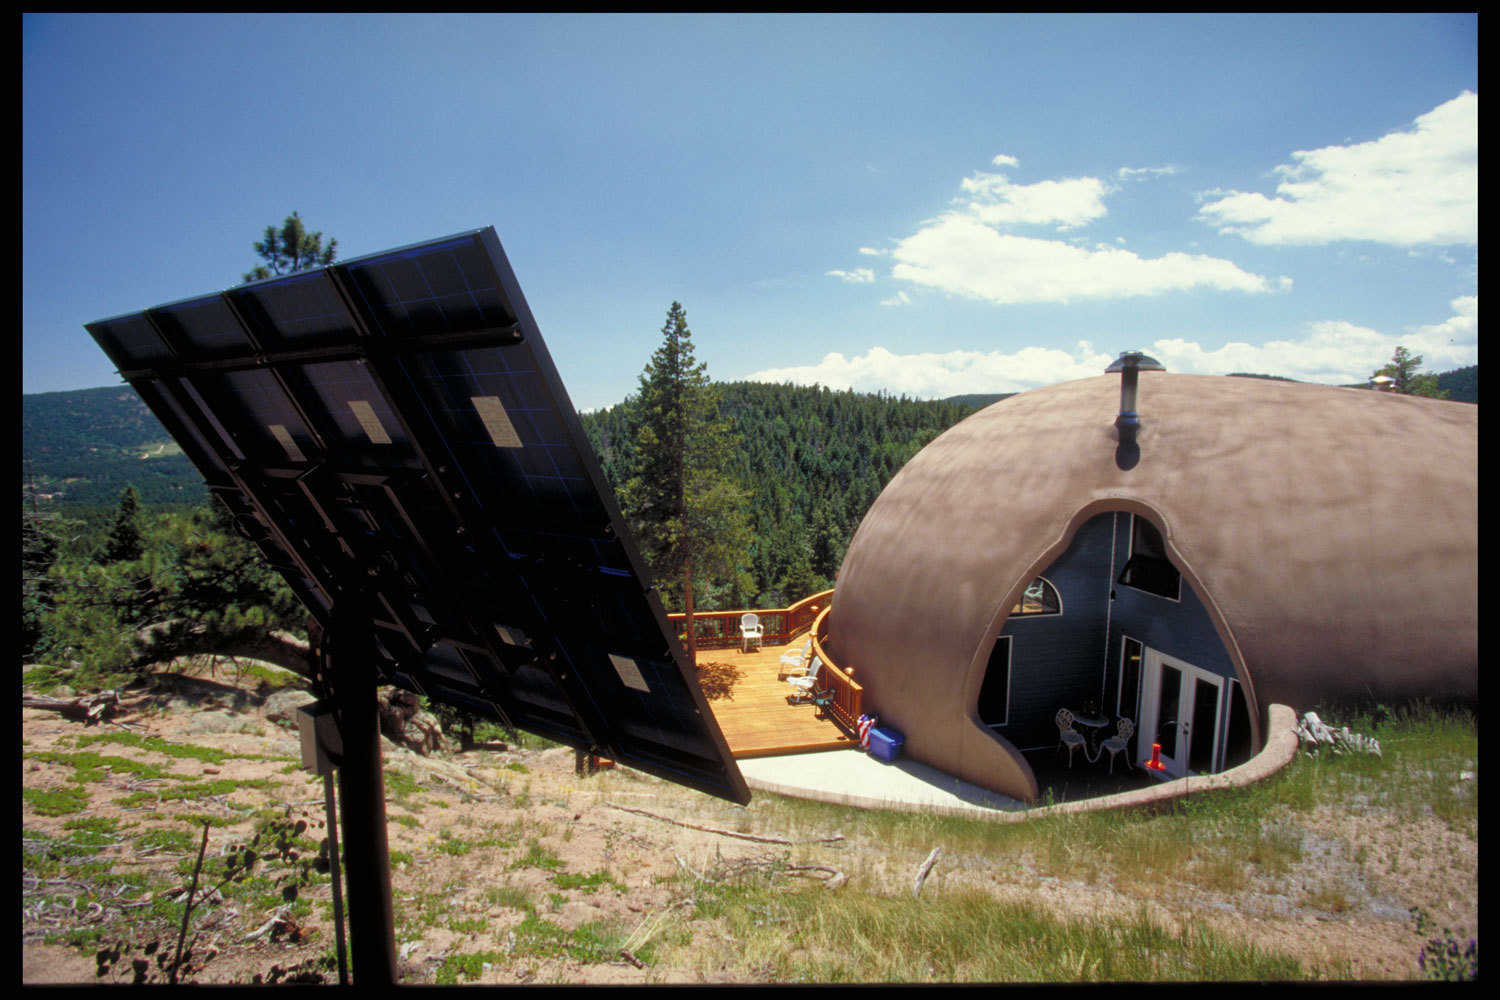 Living Off the Grid in a Dome Home | Monolithic Dome Institute